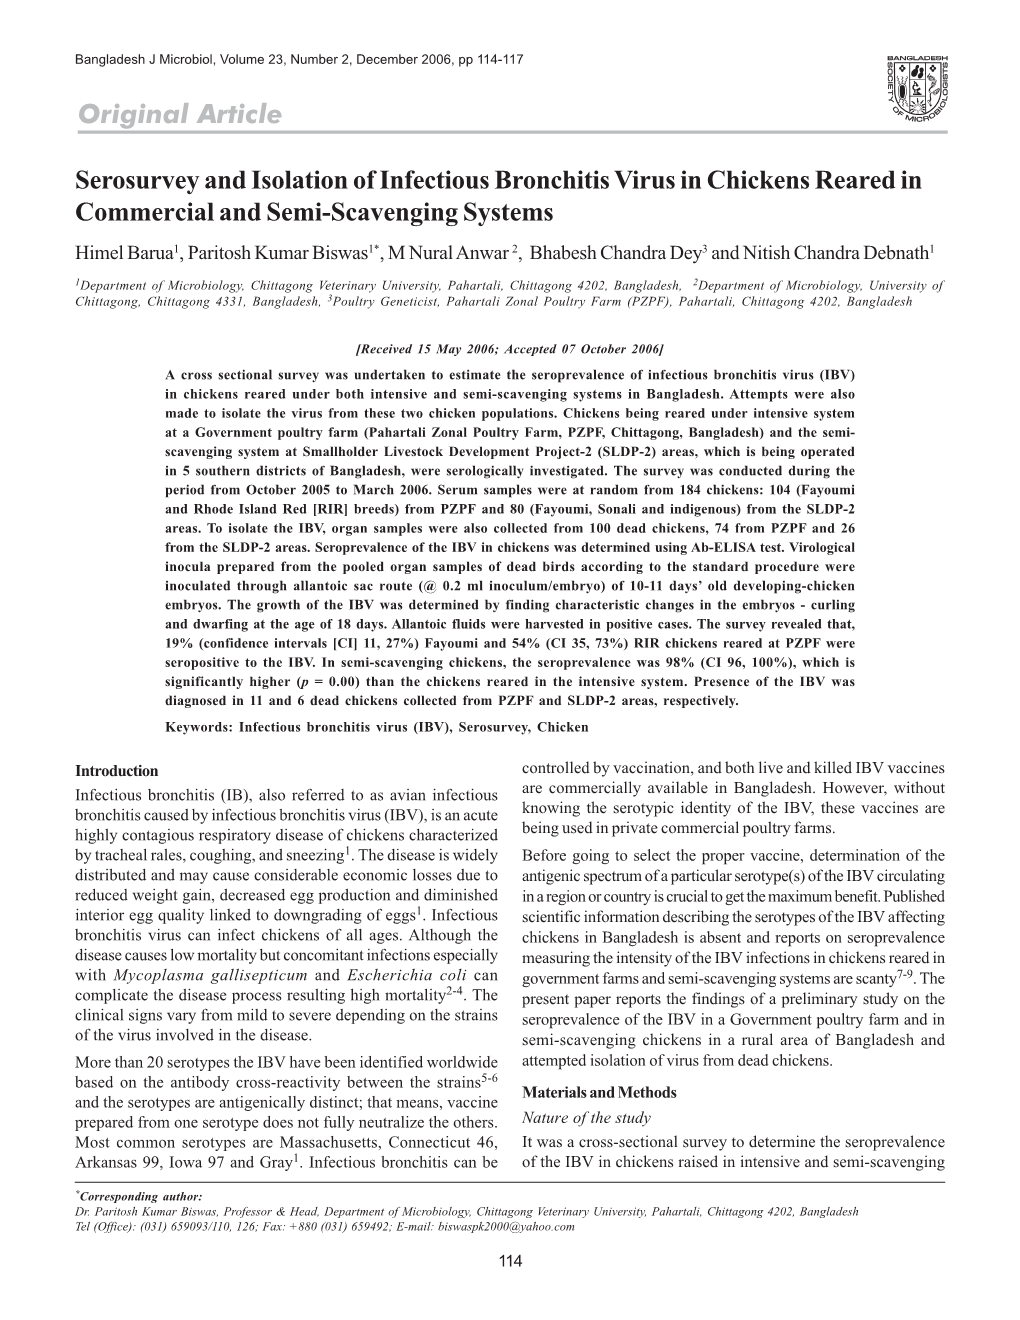 Serosurvey and Isolation of Infectious Bronchitis Virus in Chickens